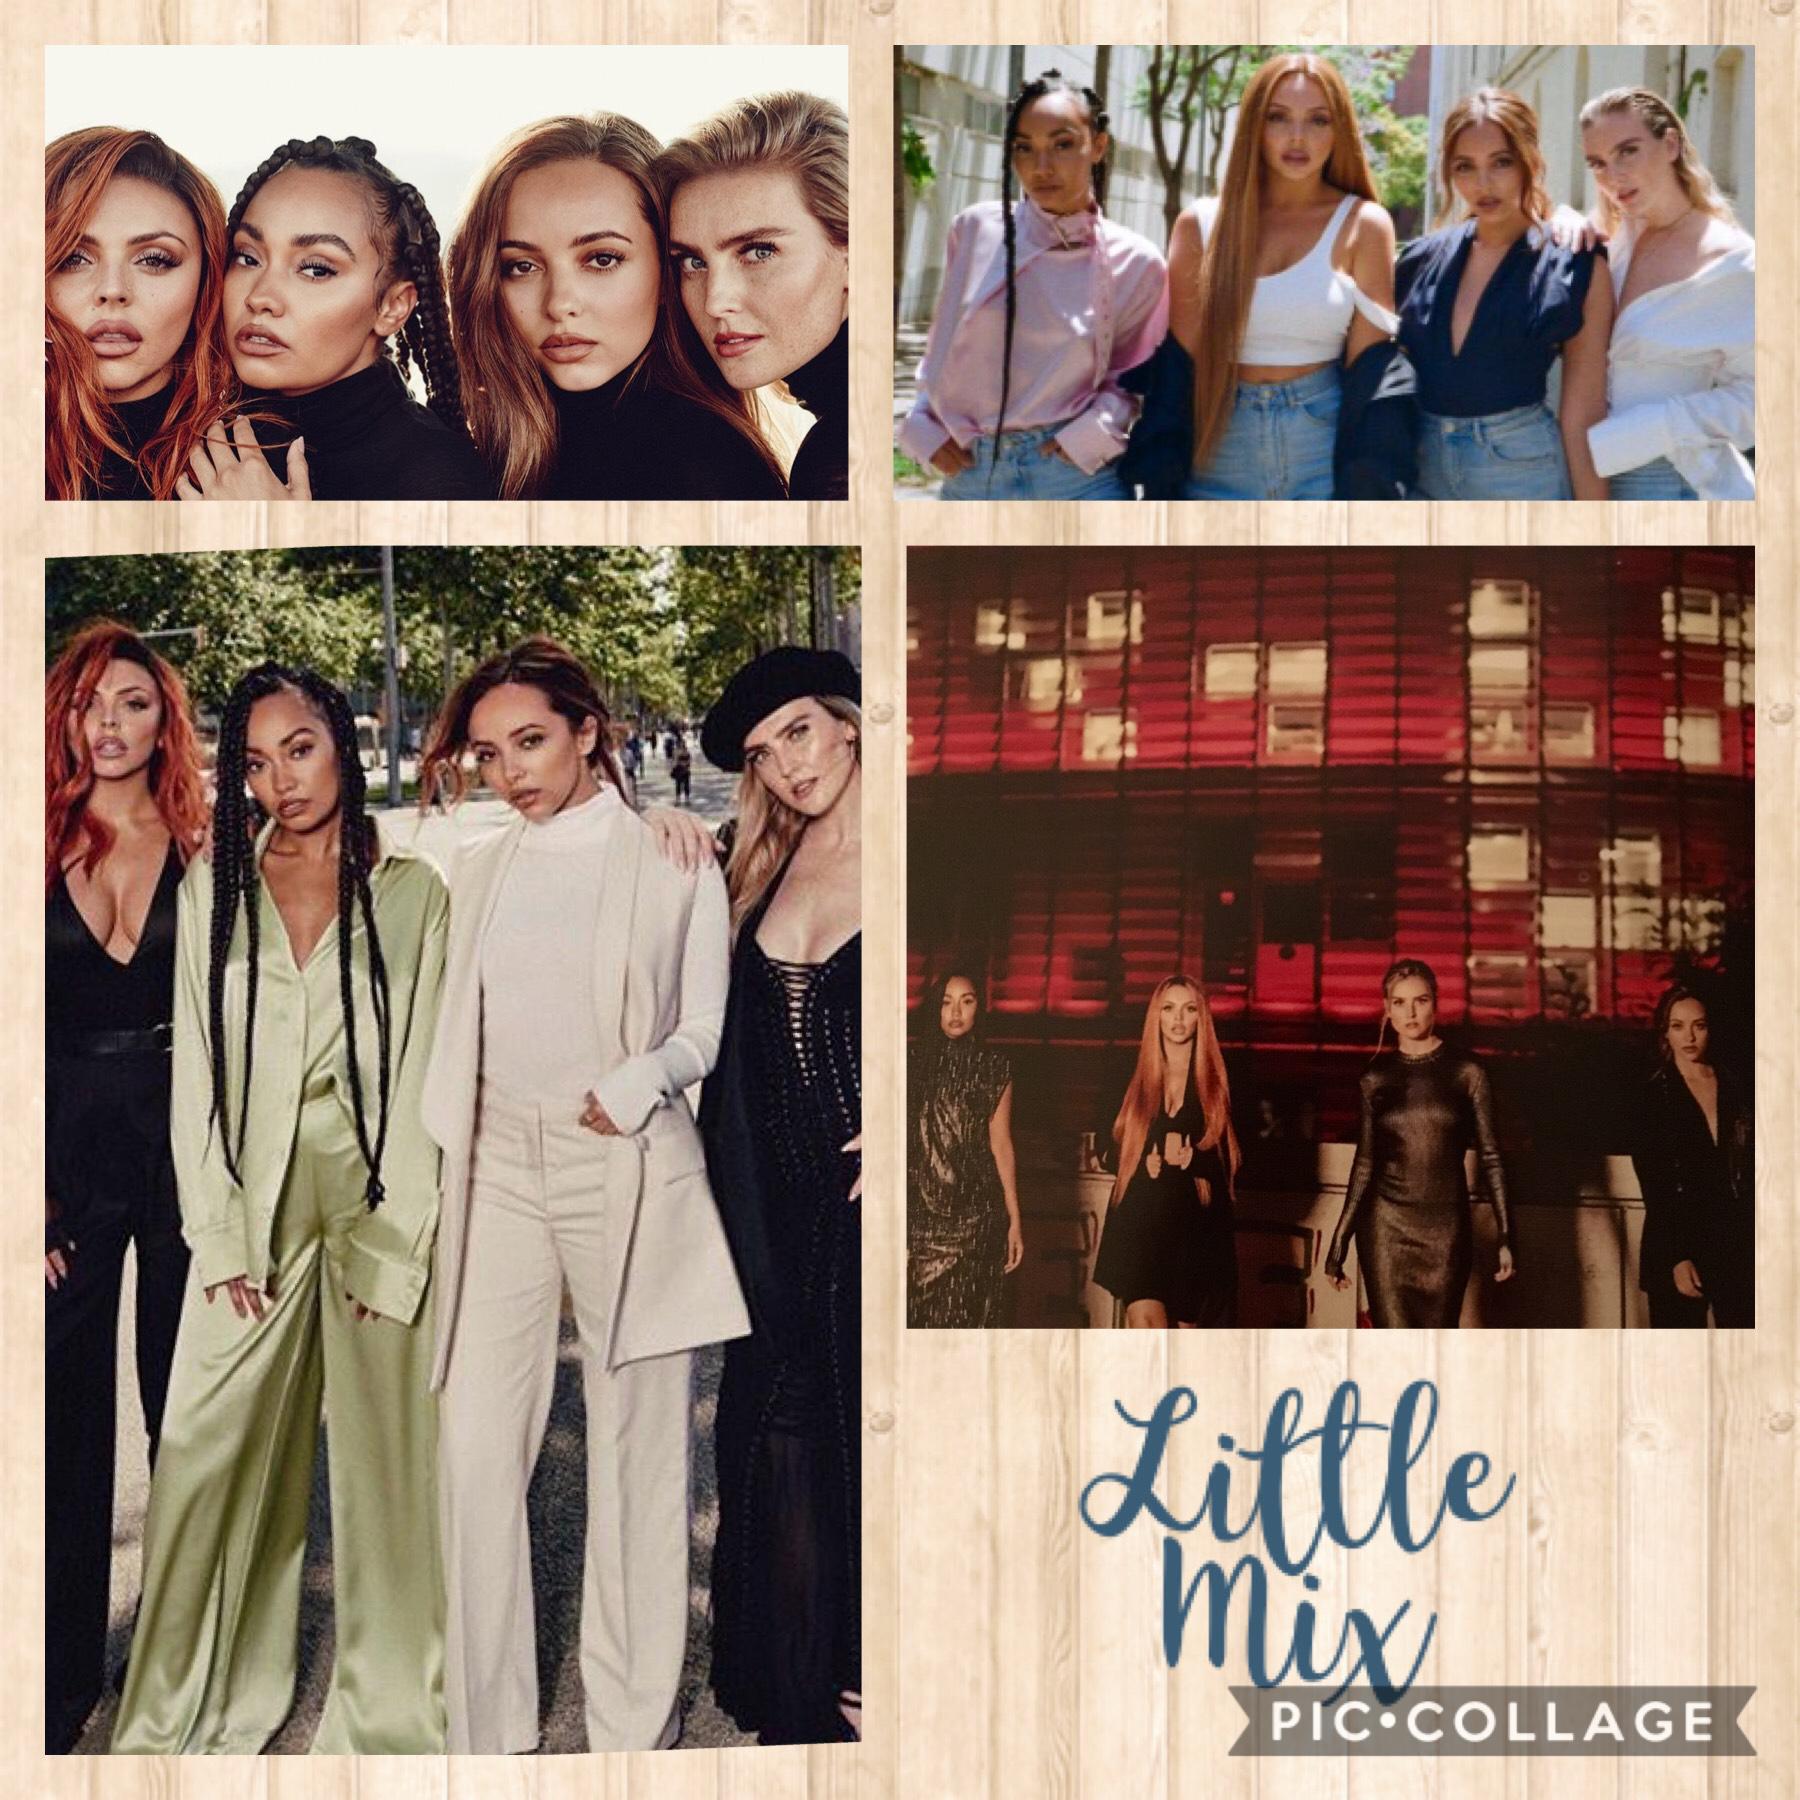 LM5 is the perfect Christmas present 🎁 